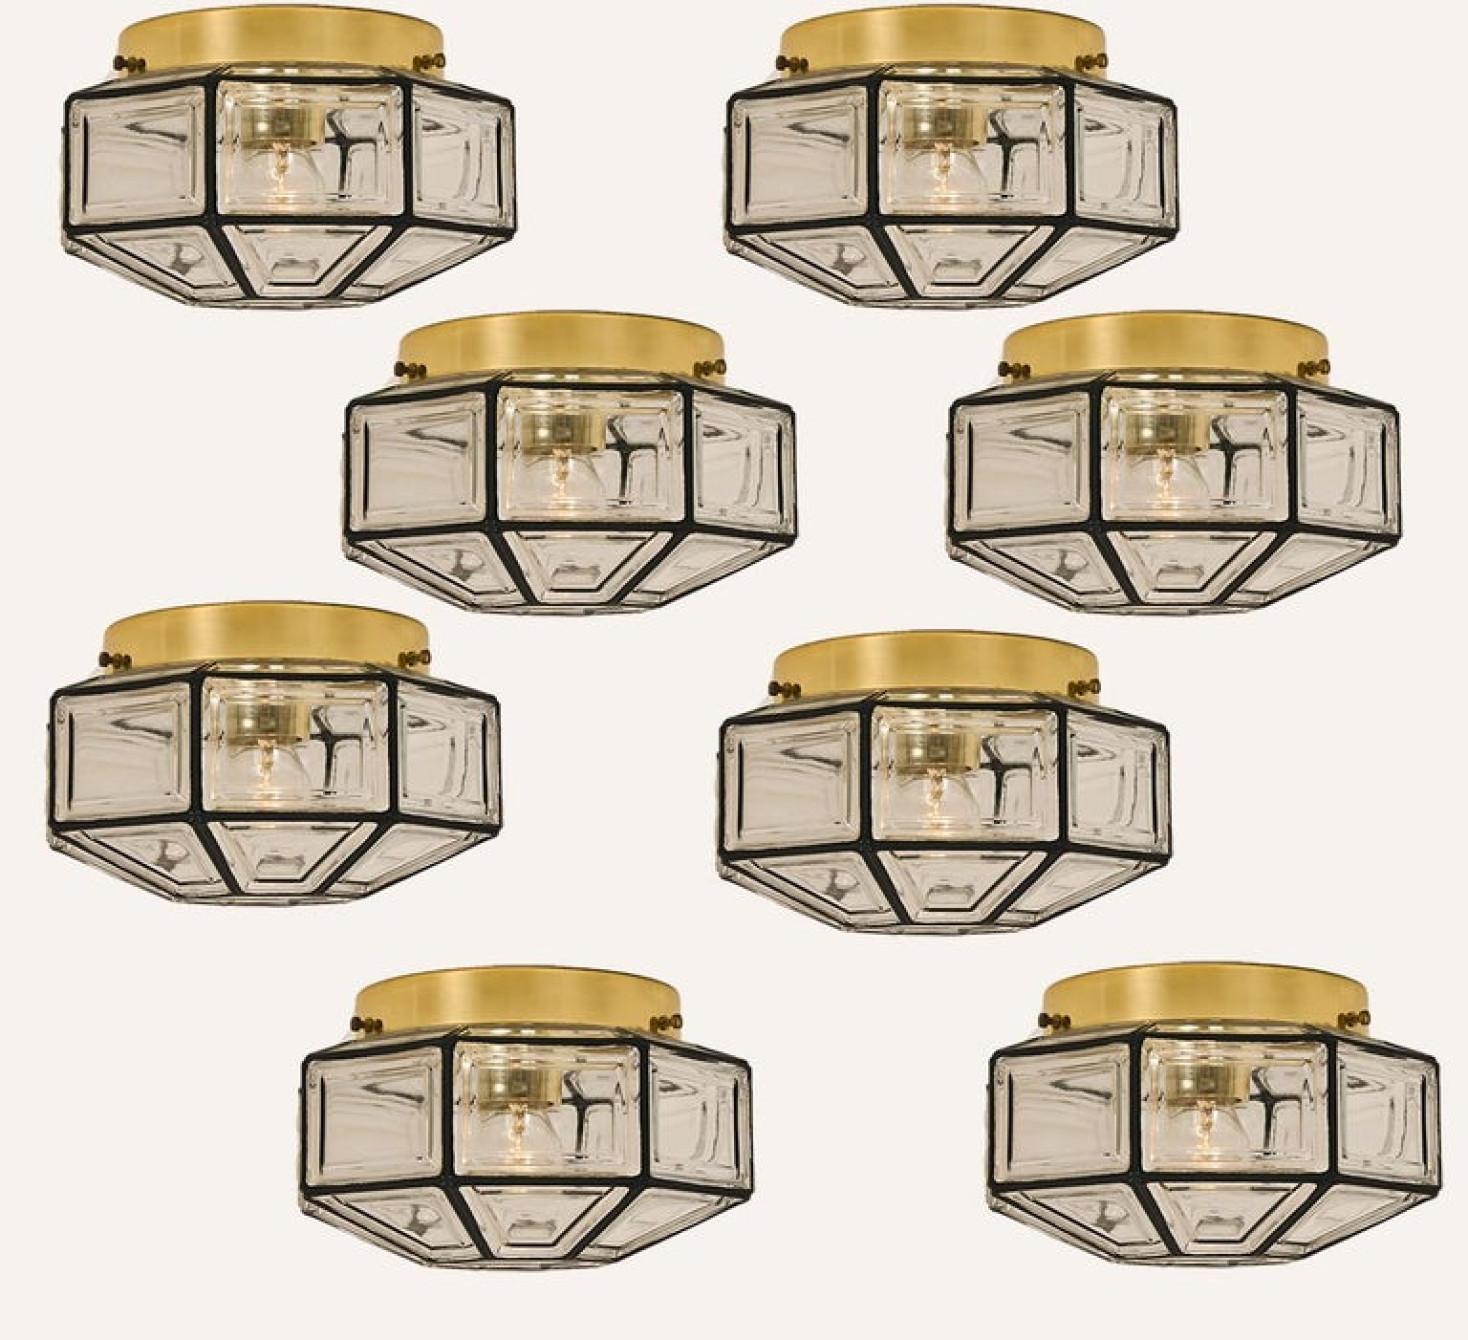 1 of the 8 beautiful set octagonal glass light flush mounts or wall lights were manufactured by Glashütte Limburg in Germany during the 1970s. Beautiful craftsmanship. Illuminates beautifully.

Please note the price is for one-piece. 8 pieces